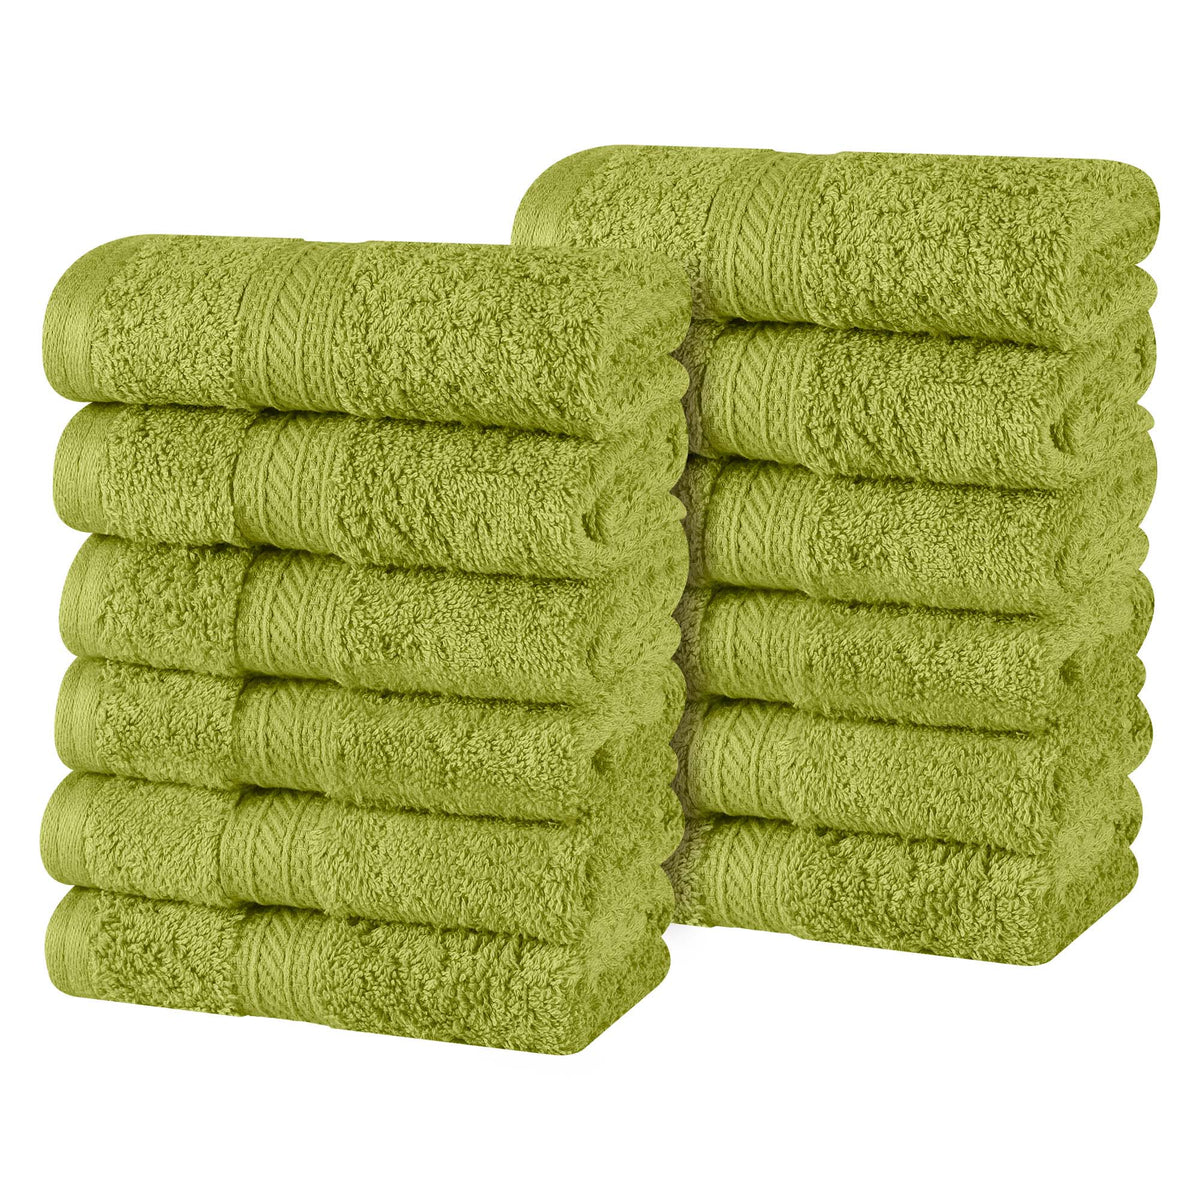 Atlas Combed Cotton Highly Absorbent Solid Face Towels / Washcloths Set of 12 - Green Essence